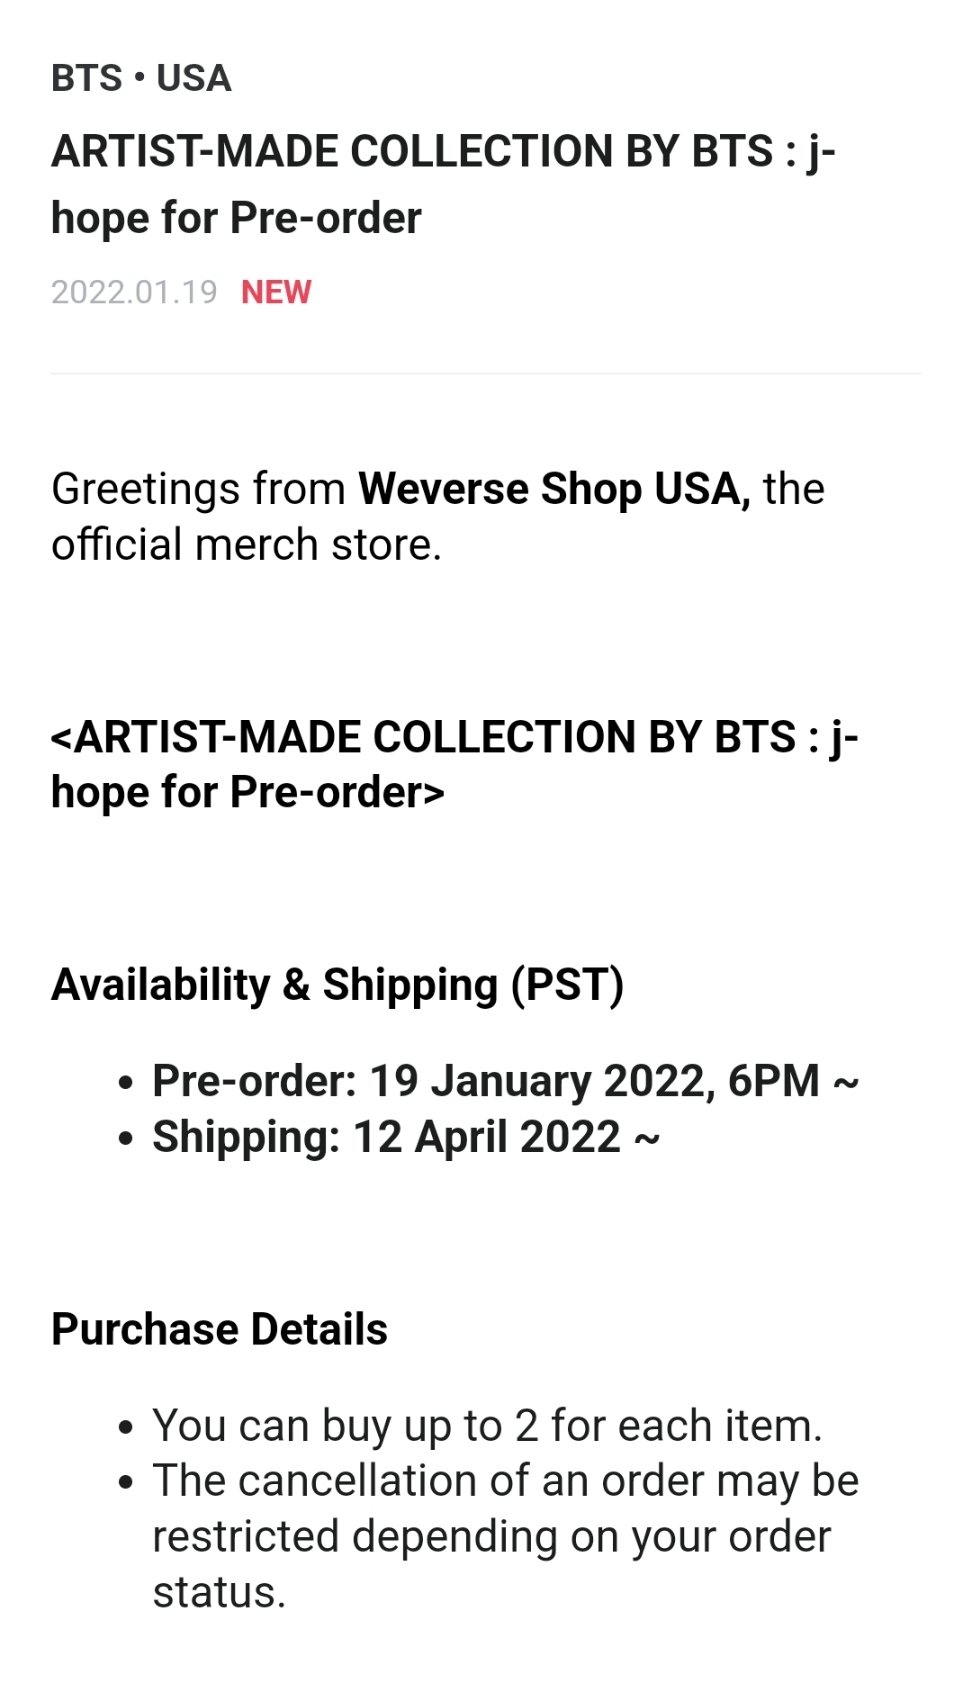 BTS ARTIST-MADE COLLECTION BY BTS [J-HOPE] SIDE BY SIDE MINI BAG